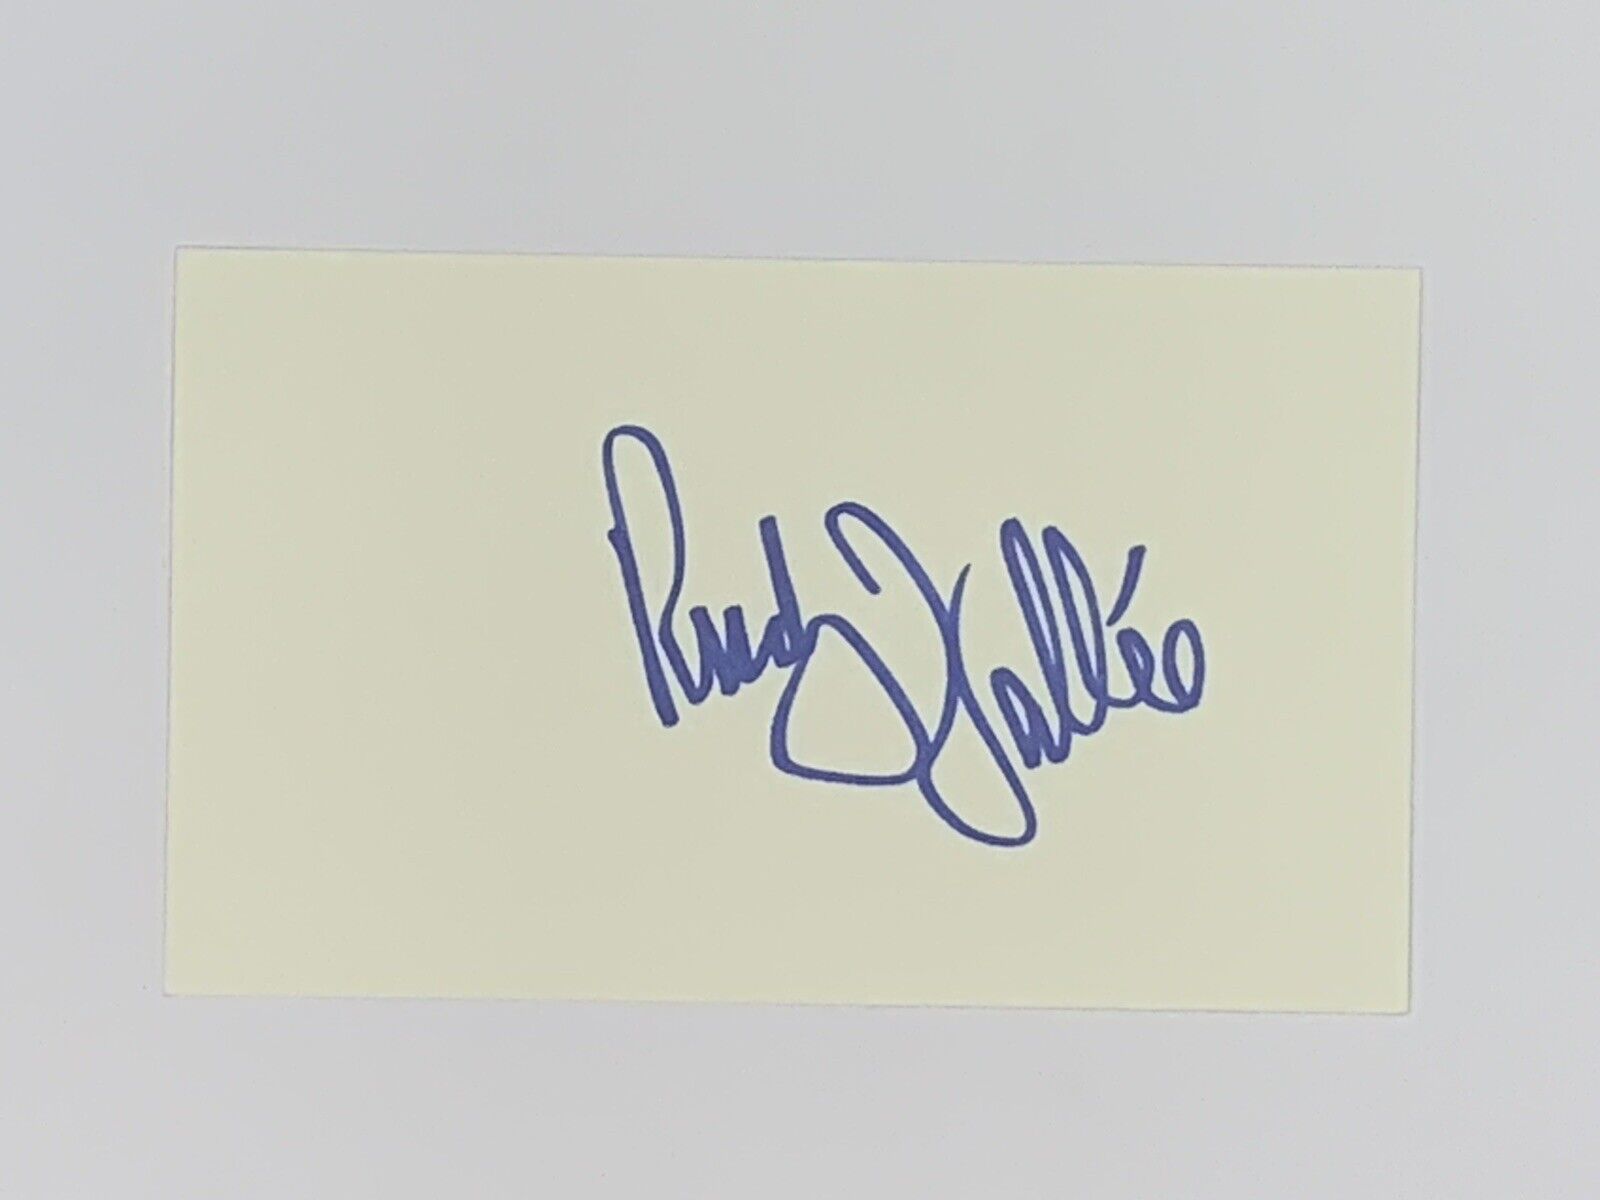 Rudy Vallee Singer Signed 3x5 Index Card Autograph D.1986